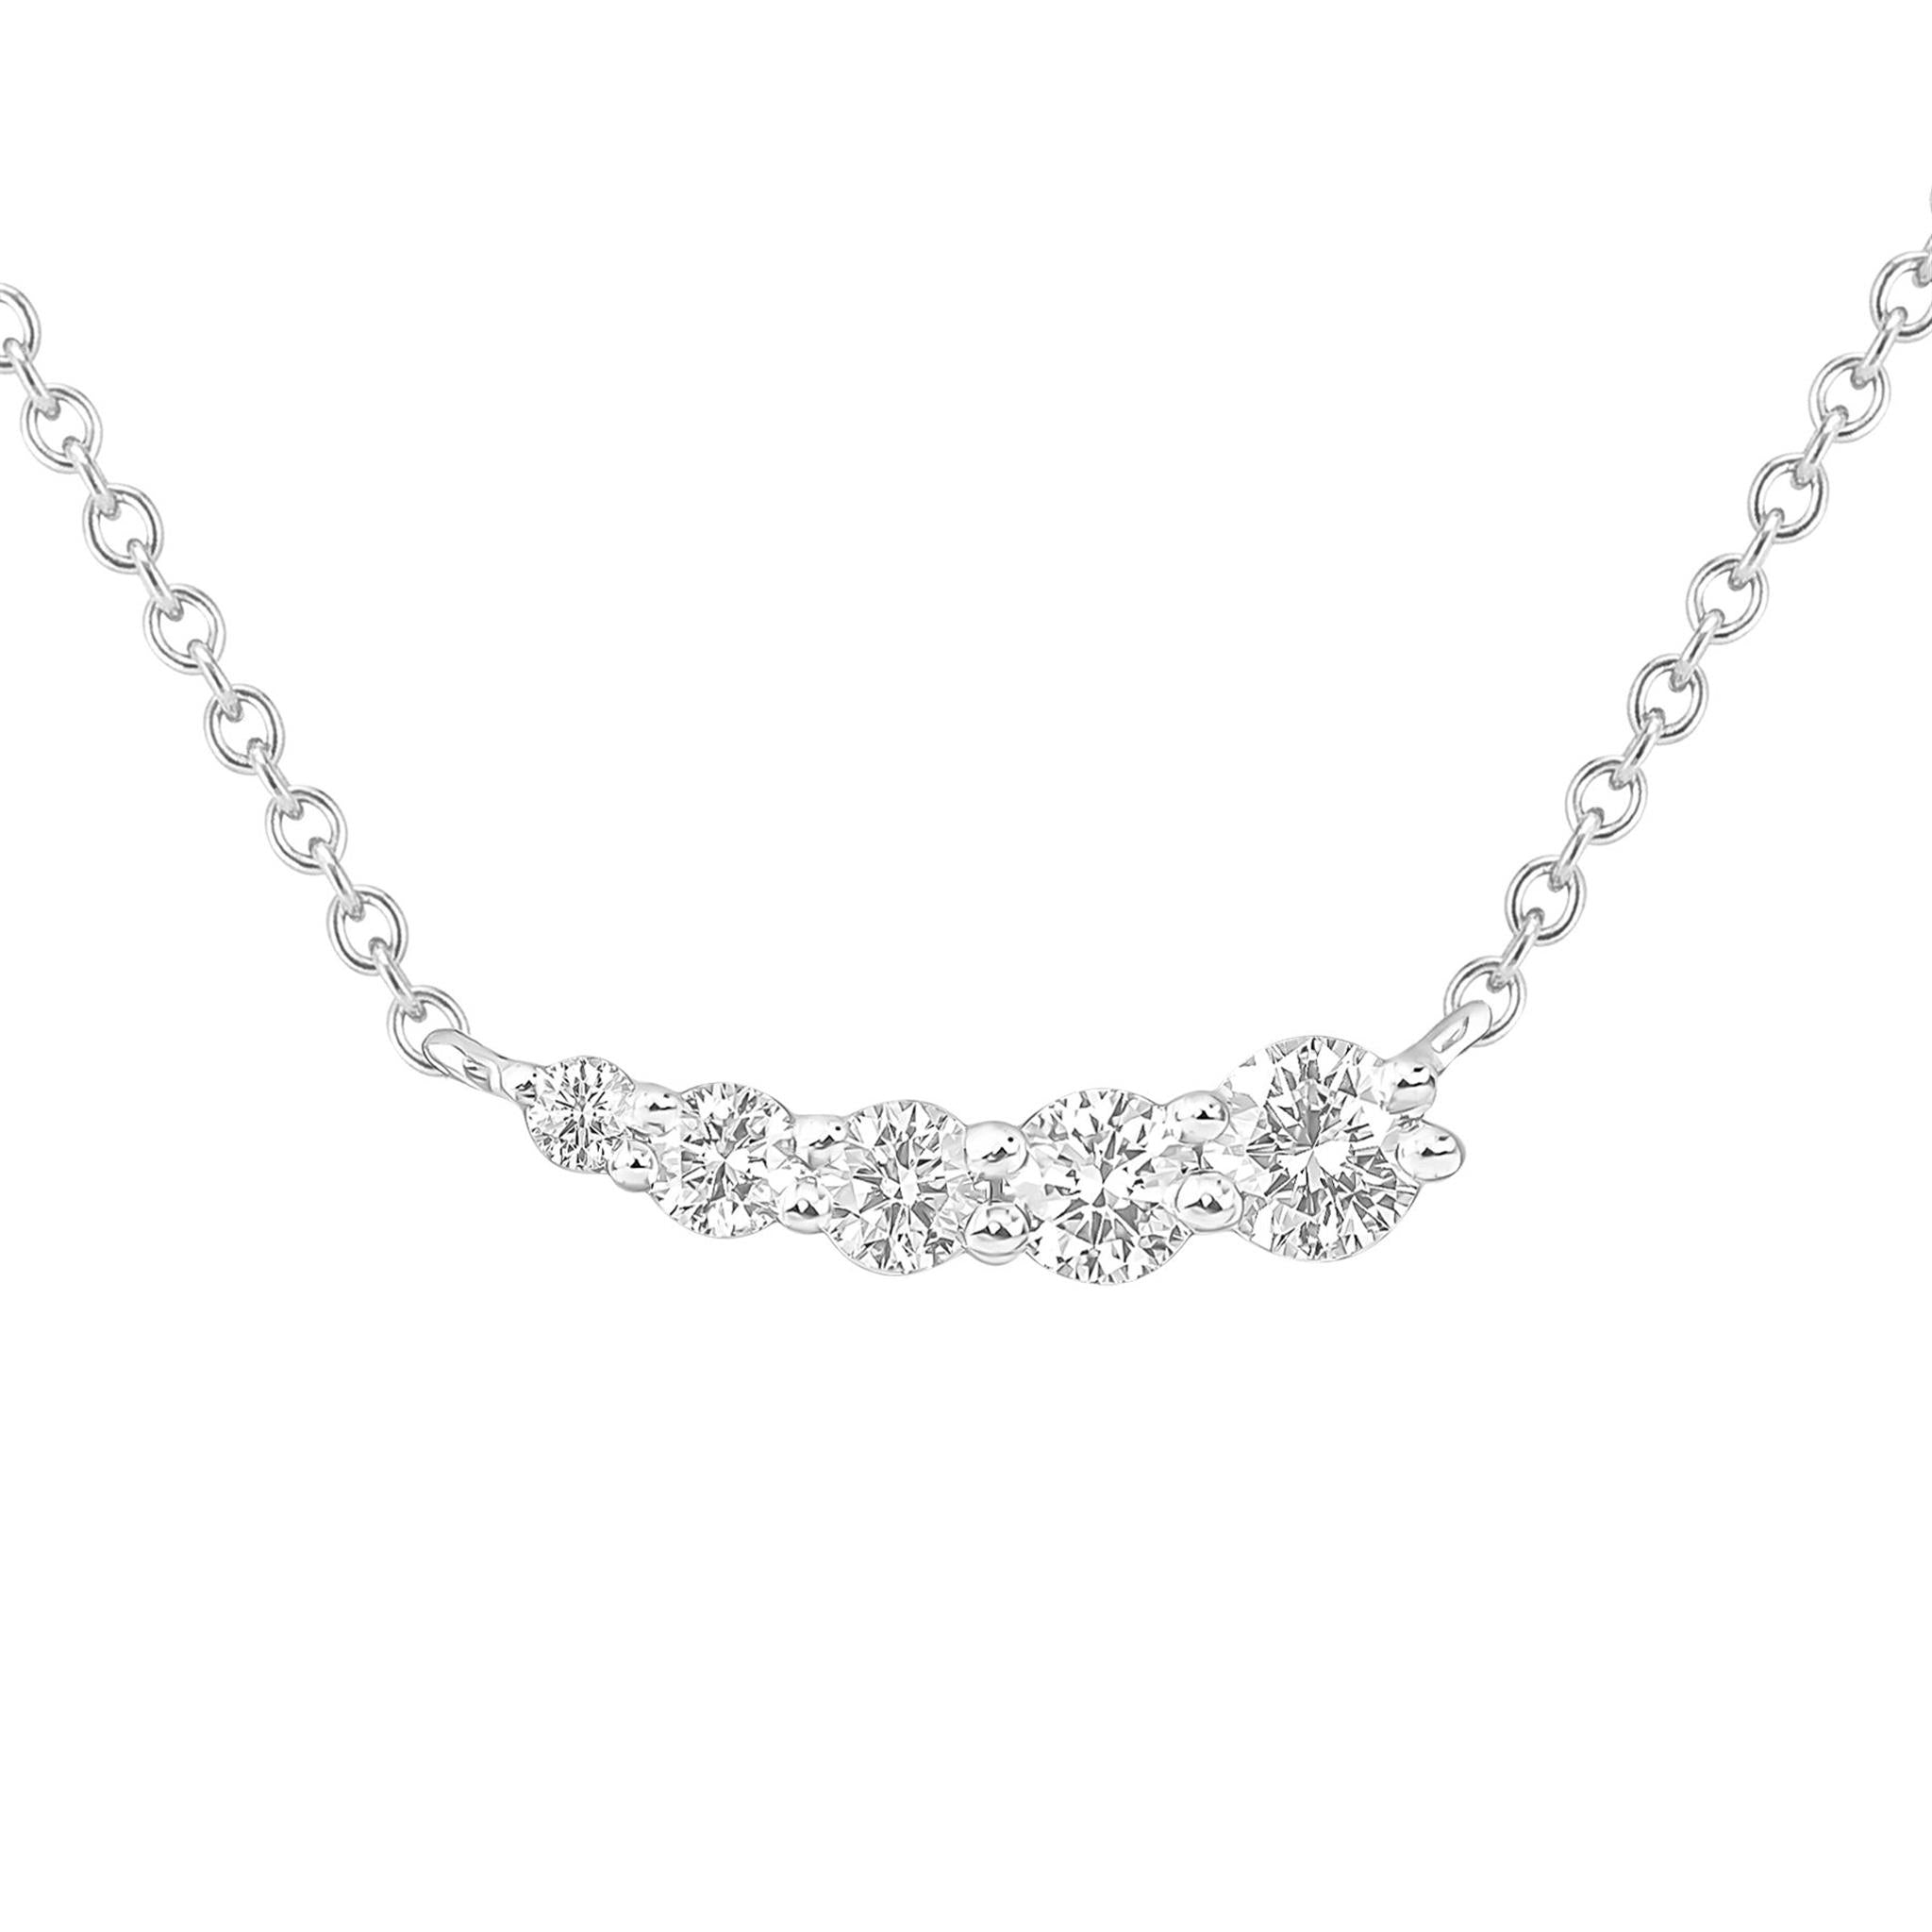 stunning | Real diamond necklace, Sell necklaces, High fashion jewelry